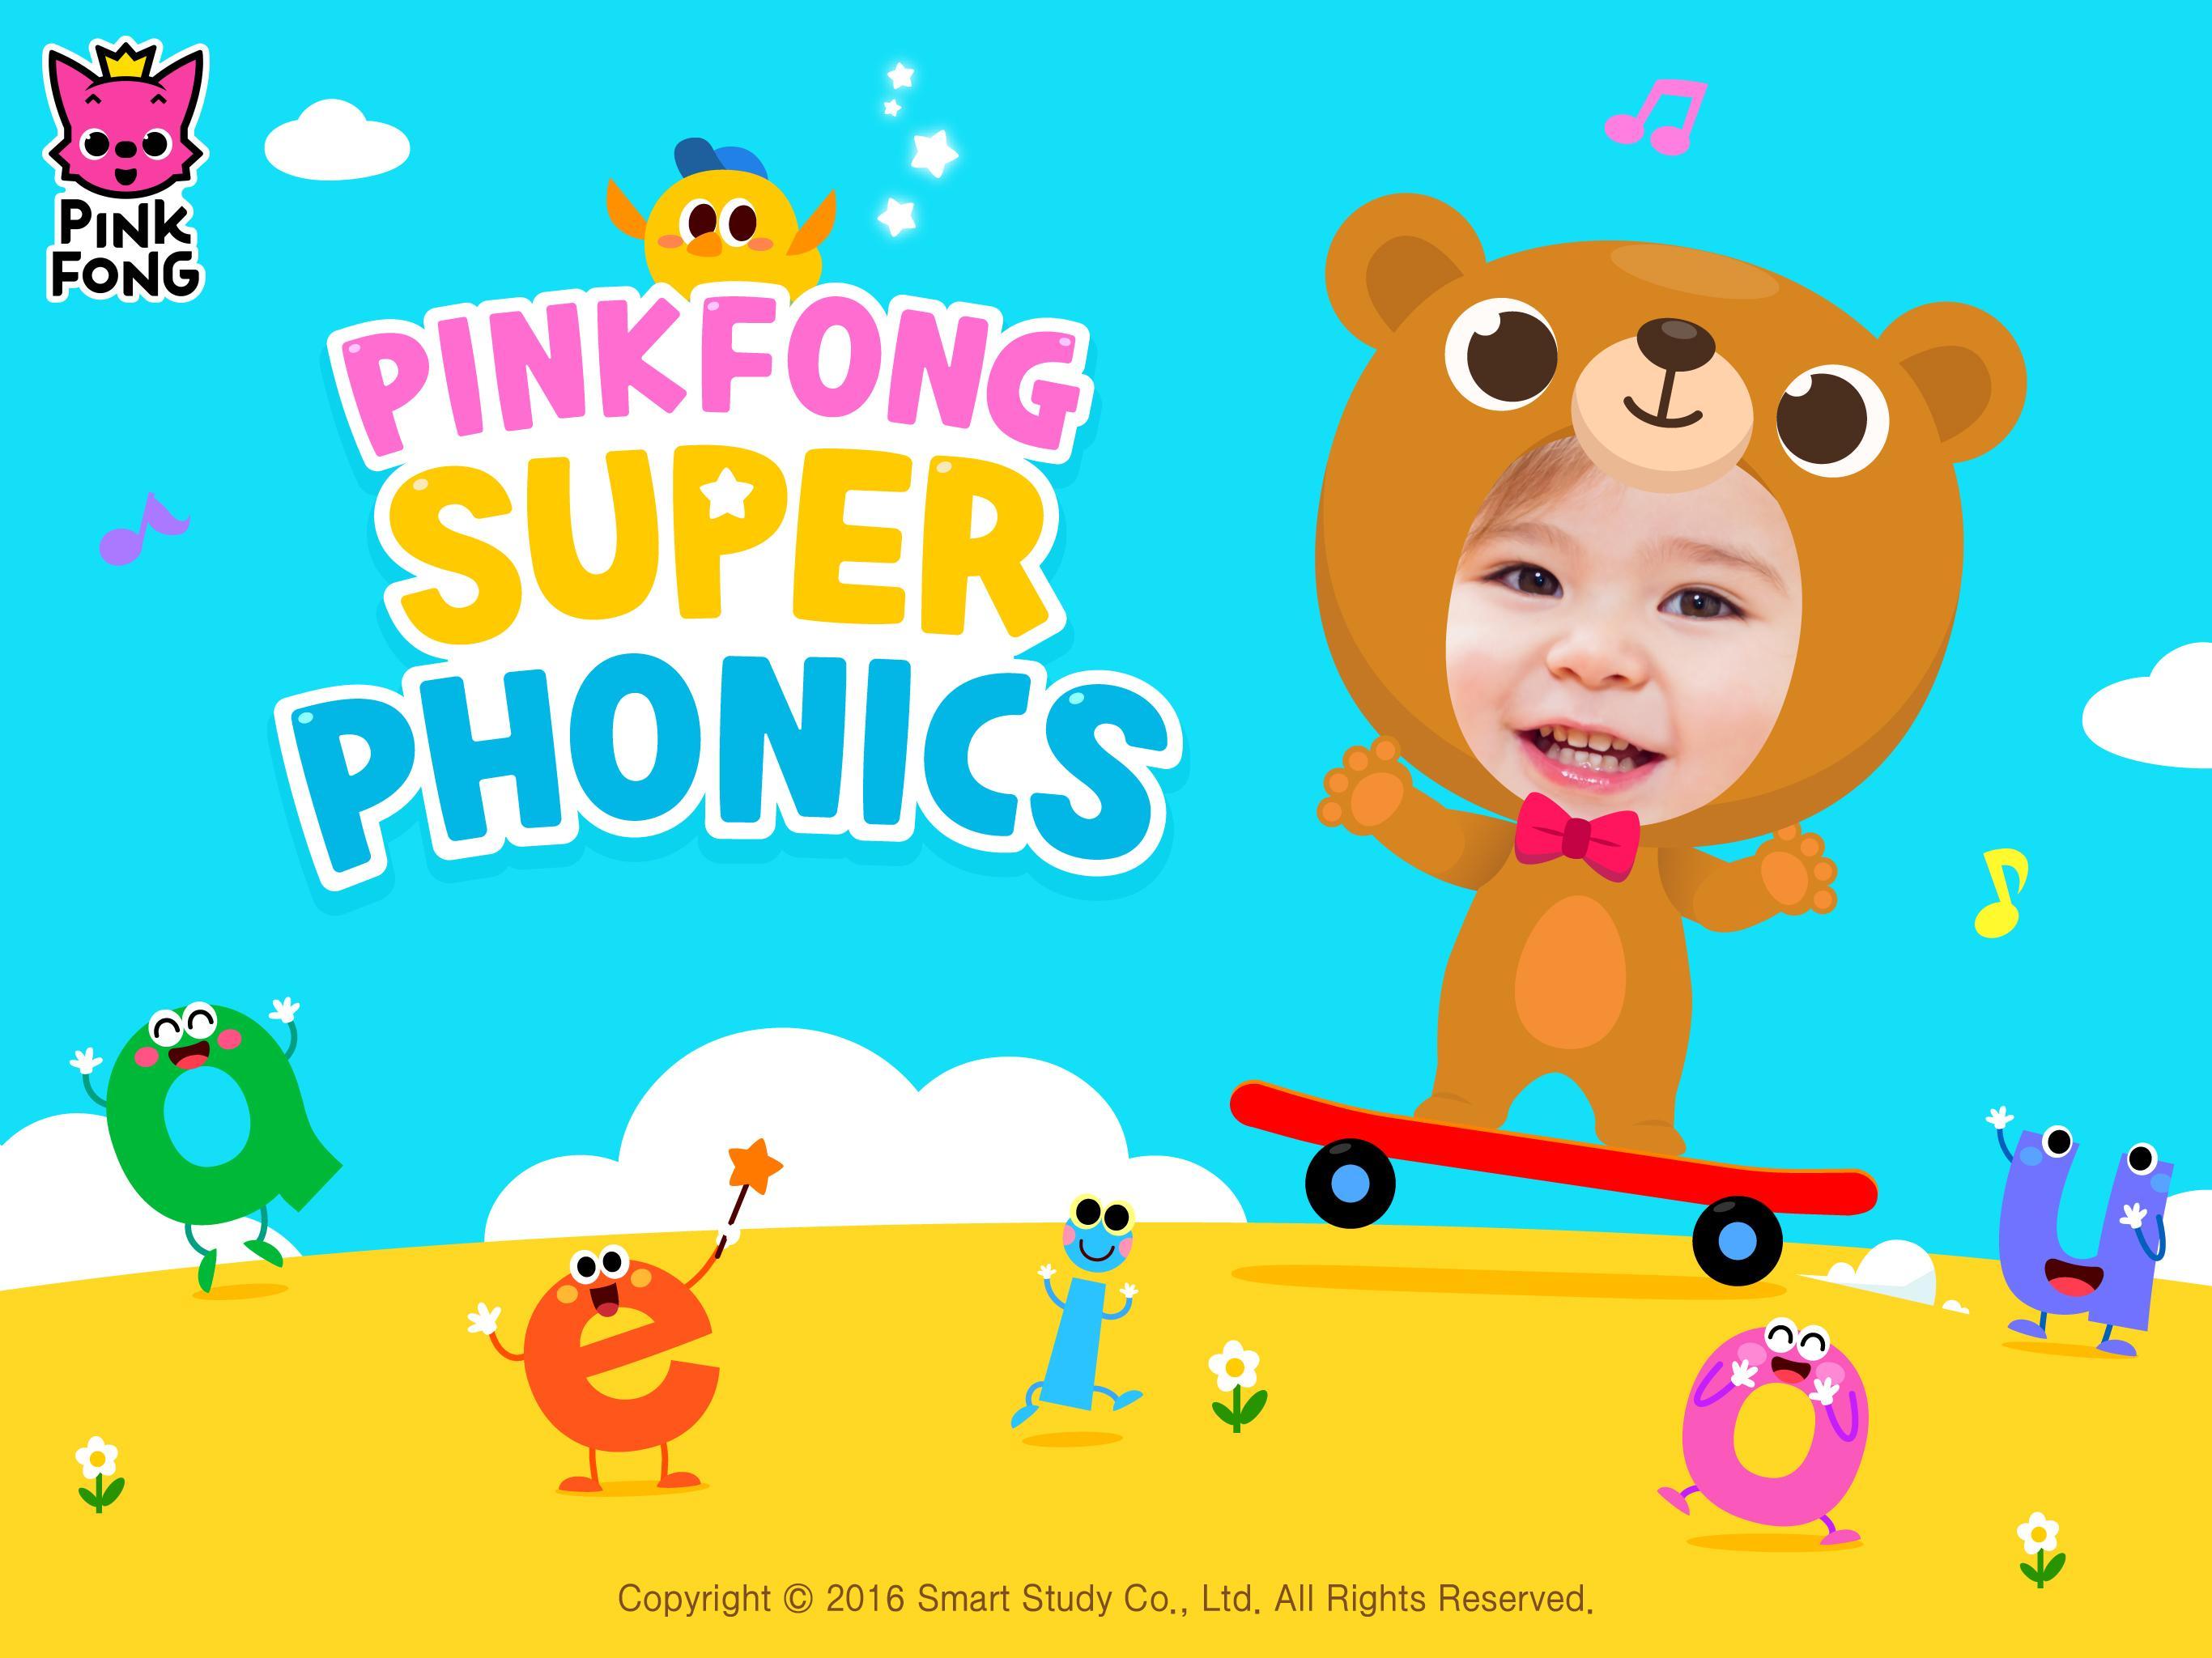 Pinkfong Super Phonics for Android - APK Download